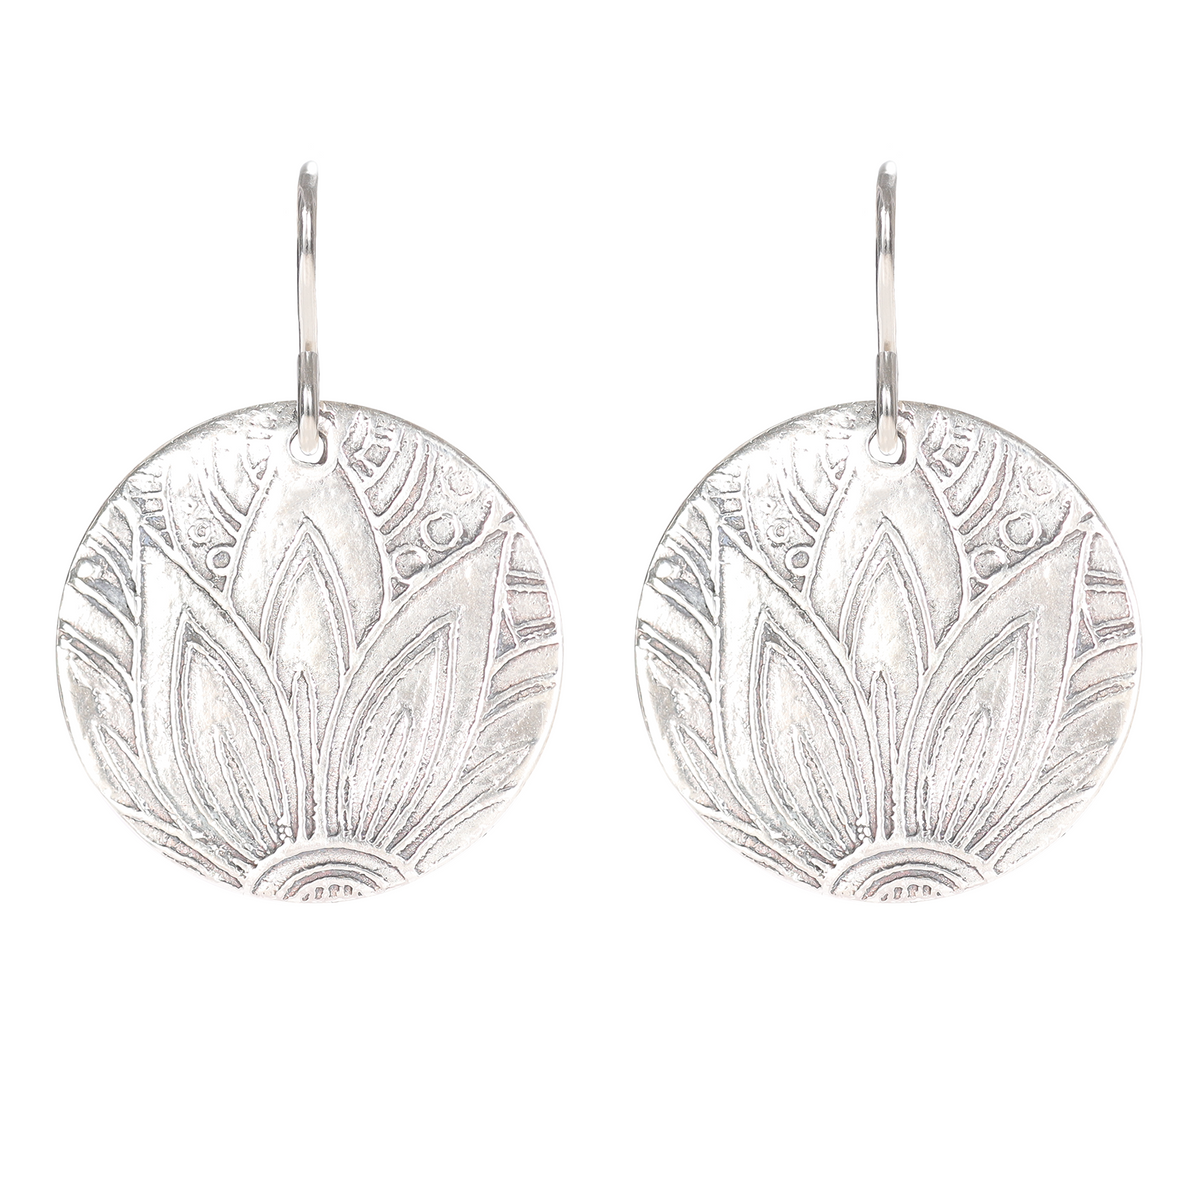 Agave Textured Large Sterling Silver Earrings on Short Ear Wires